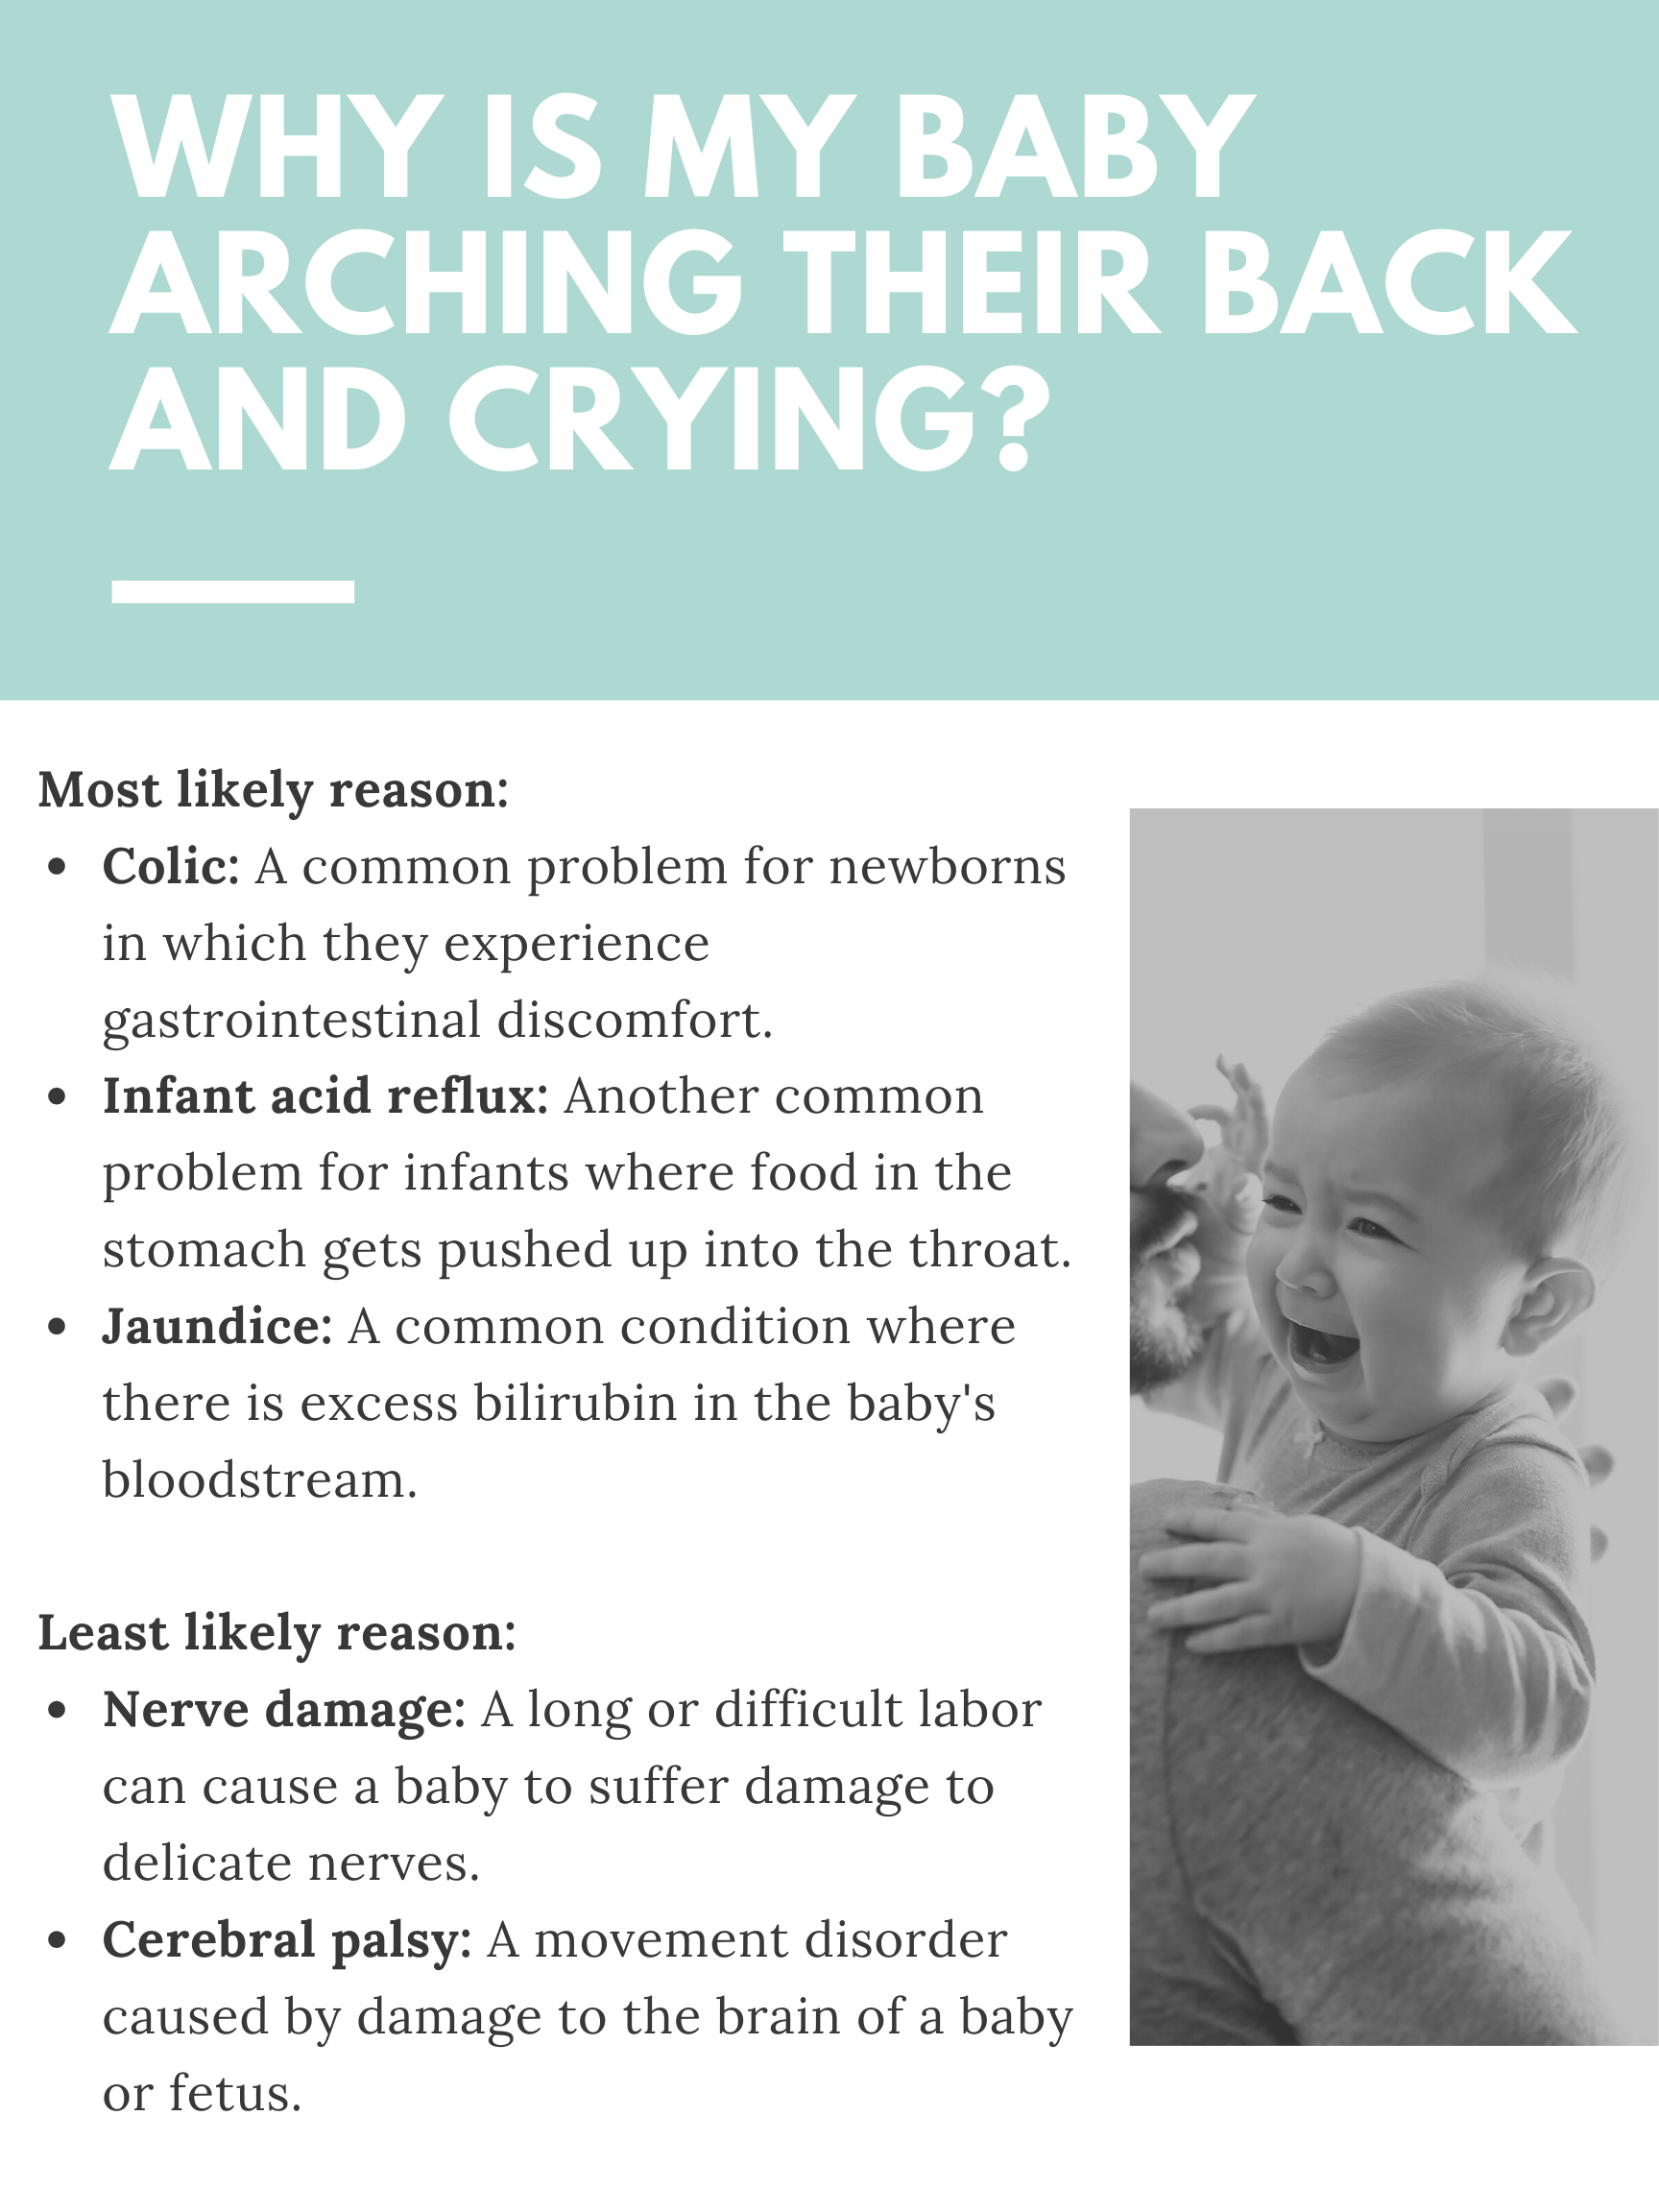 Baby Arching Back and Crying - Causes and Solutions